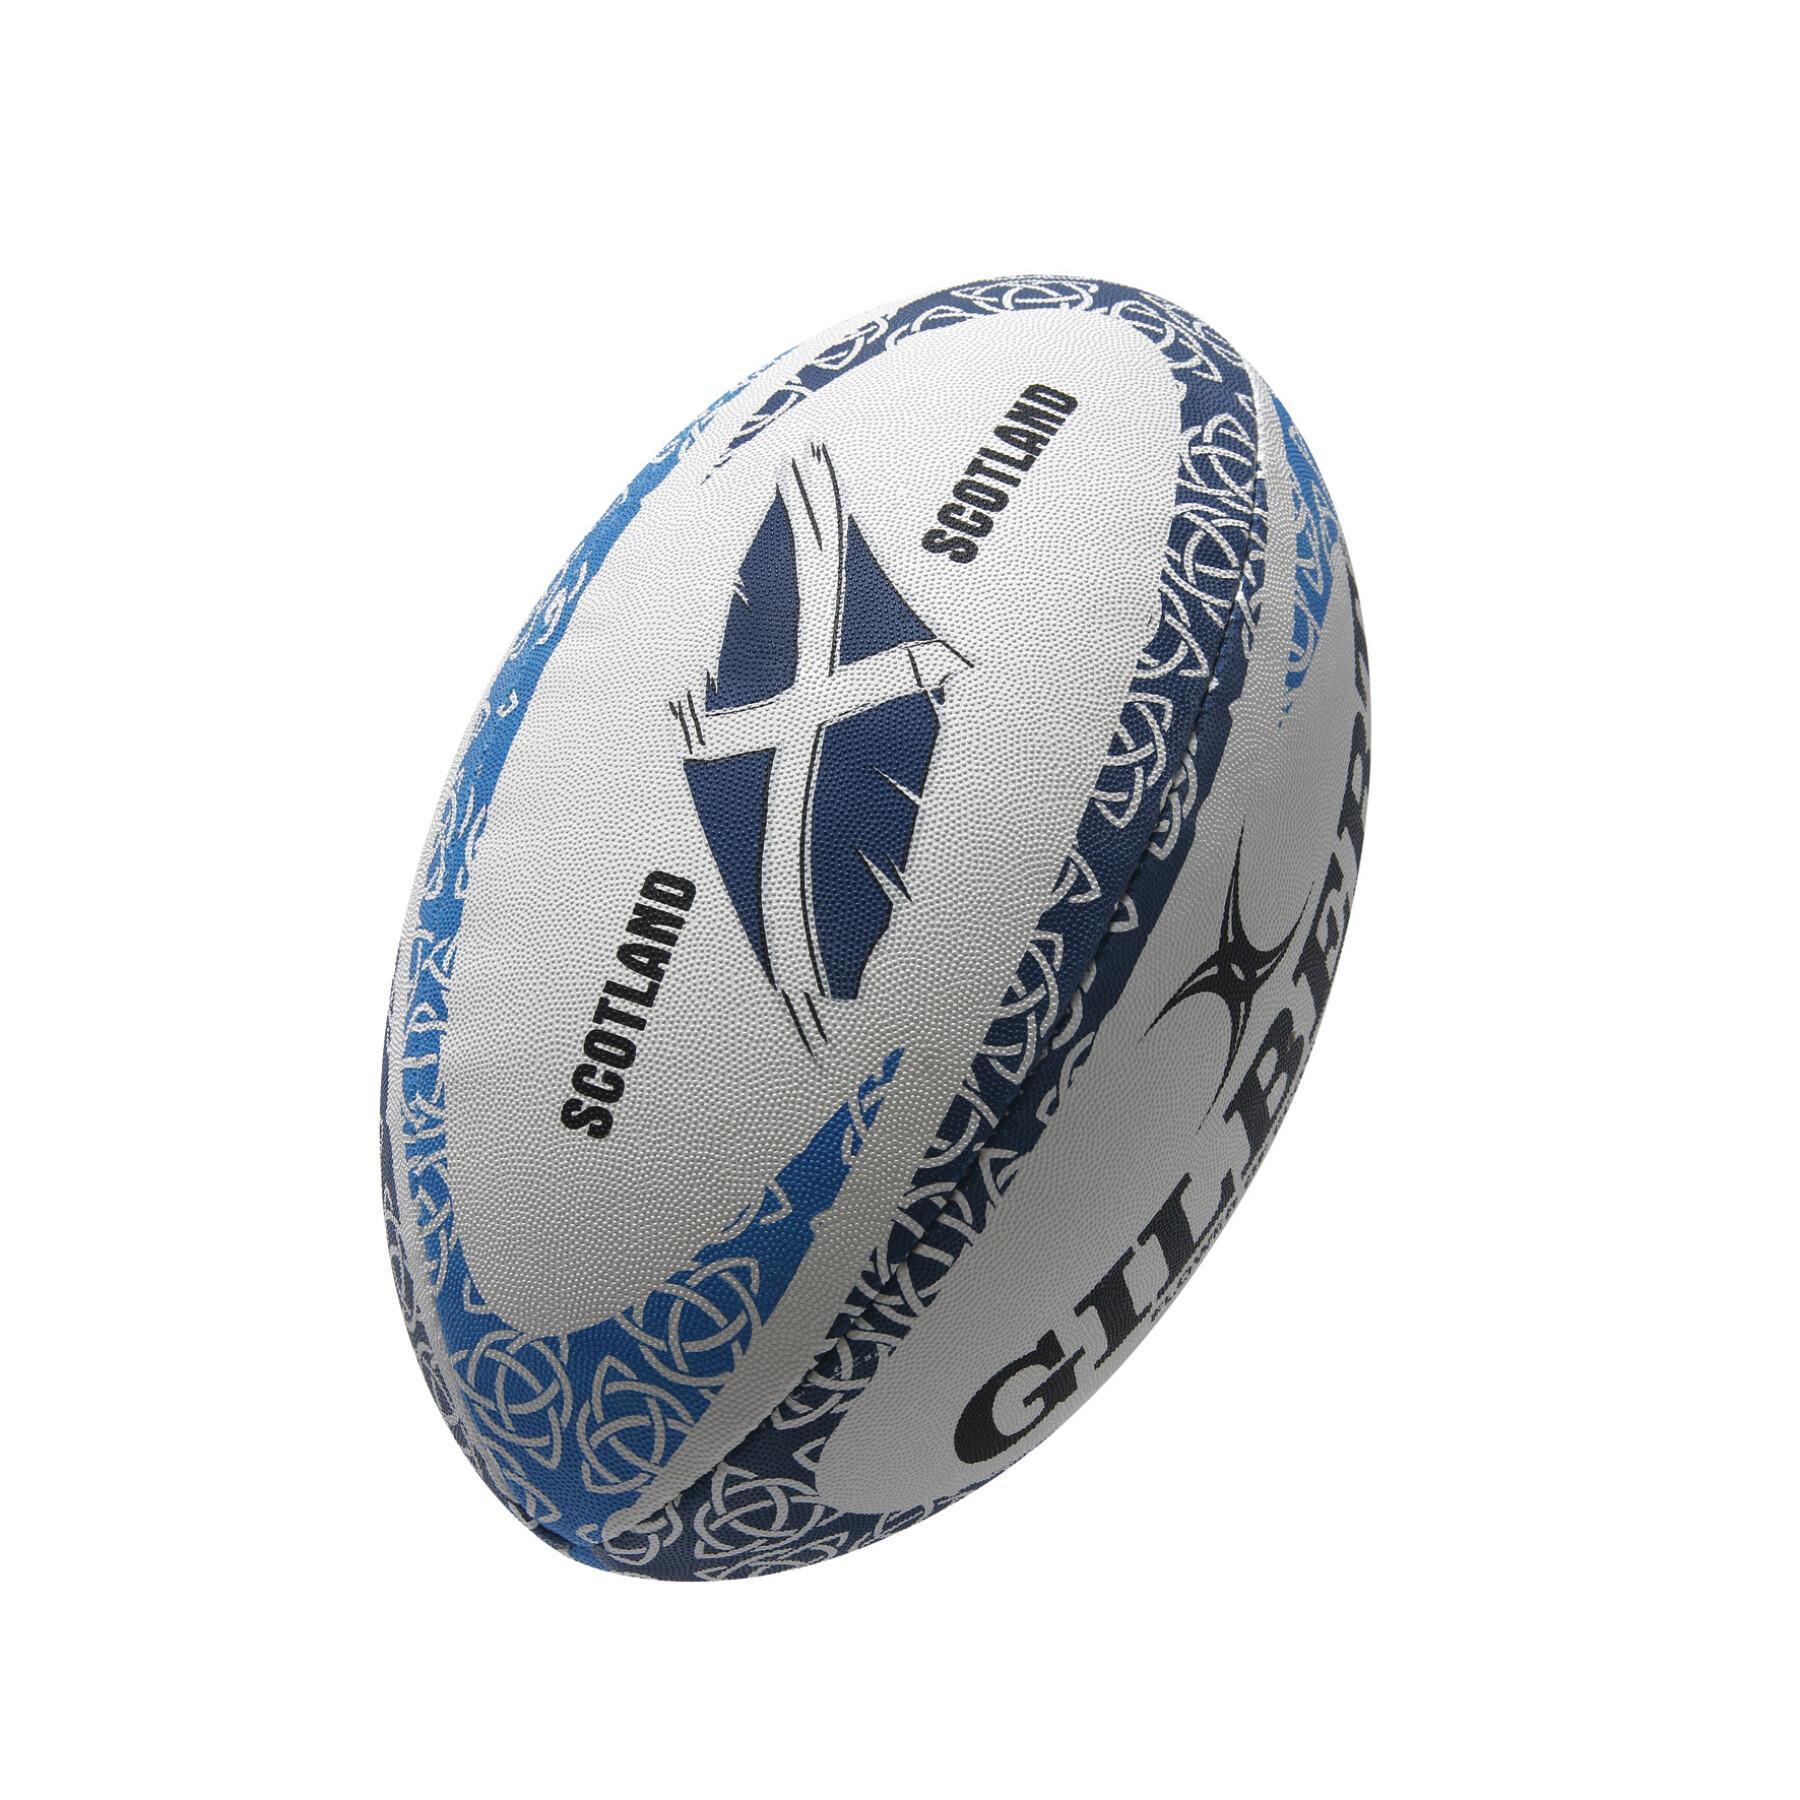 Mini rugbybal mascotte Gilbert Flower of Ecosse (taille 1)